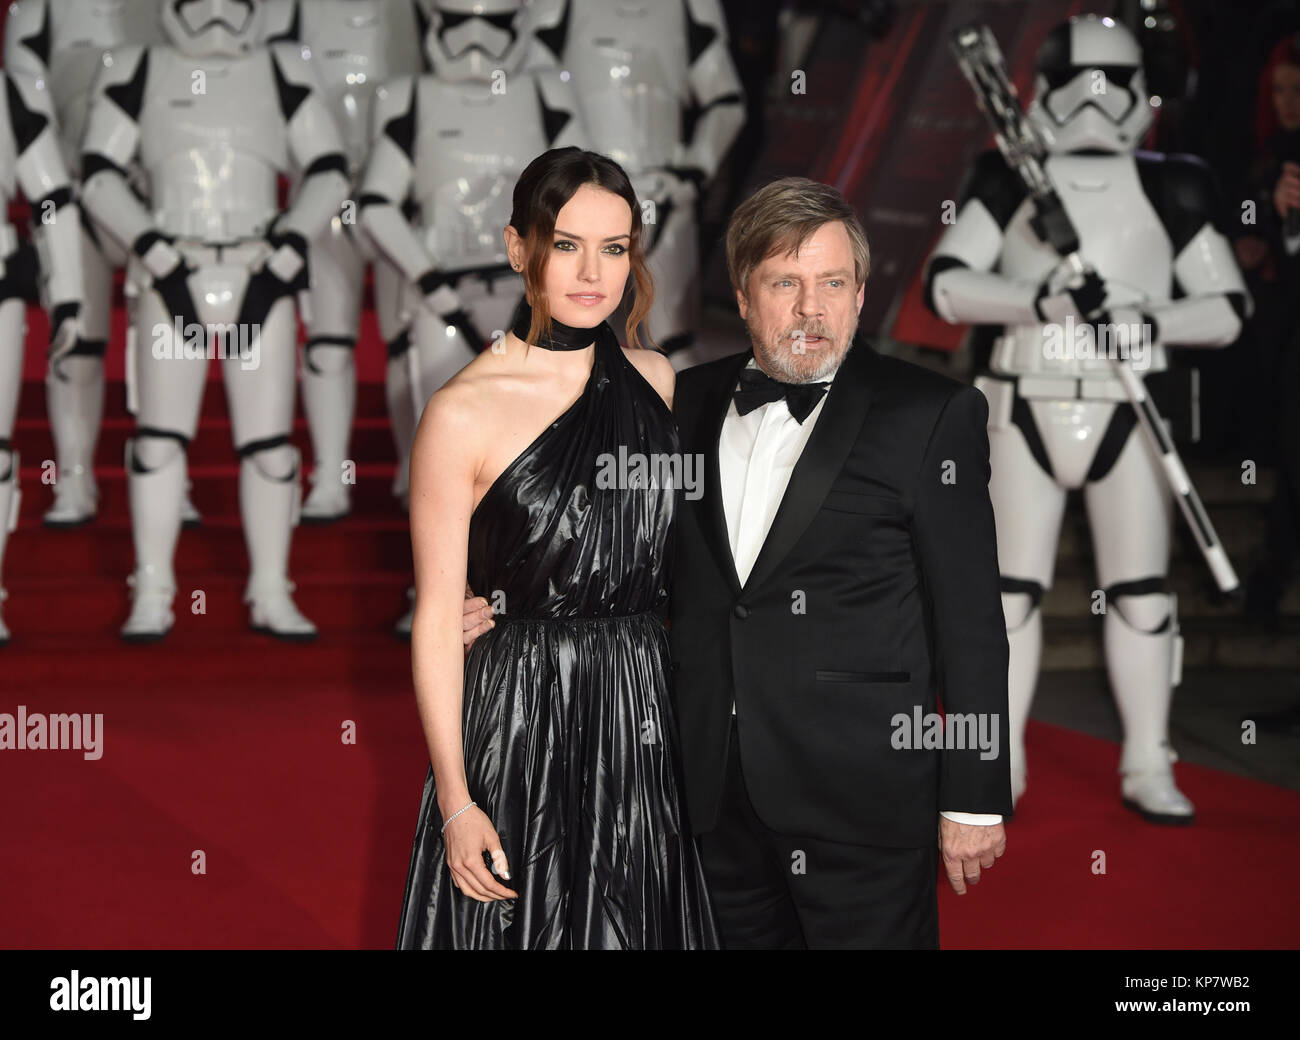 Photo Must Be Credited ©Alpha Press 079965 12/12/2017 Daisy Ridley and Mark Hamill Star Wars The Last Jedi European Premiere at Royal Albert Hall London Stock Photo